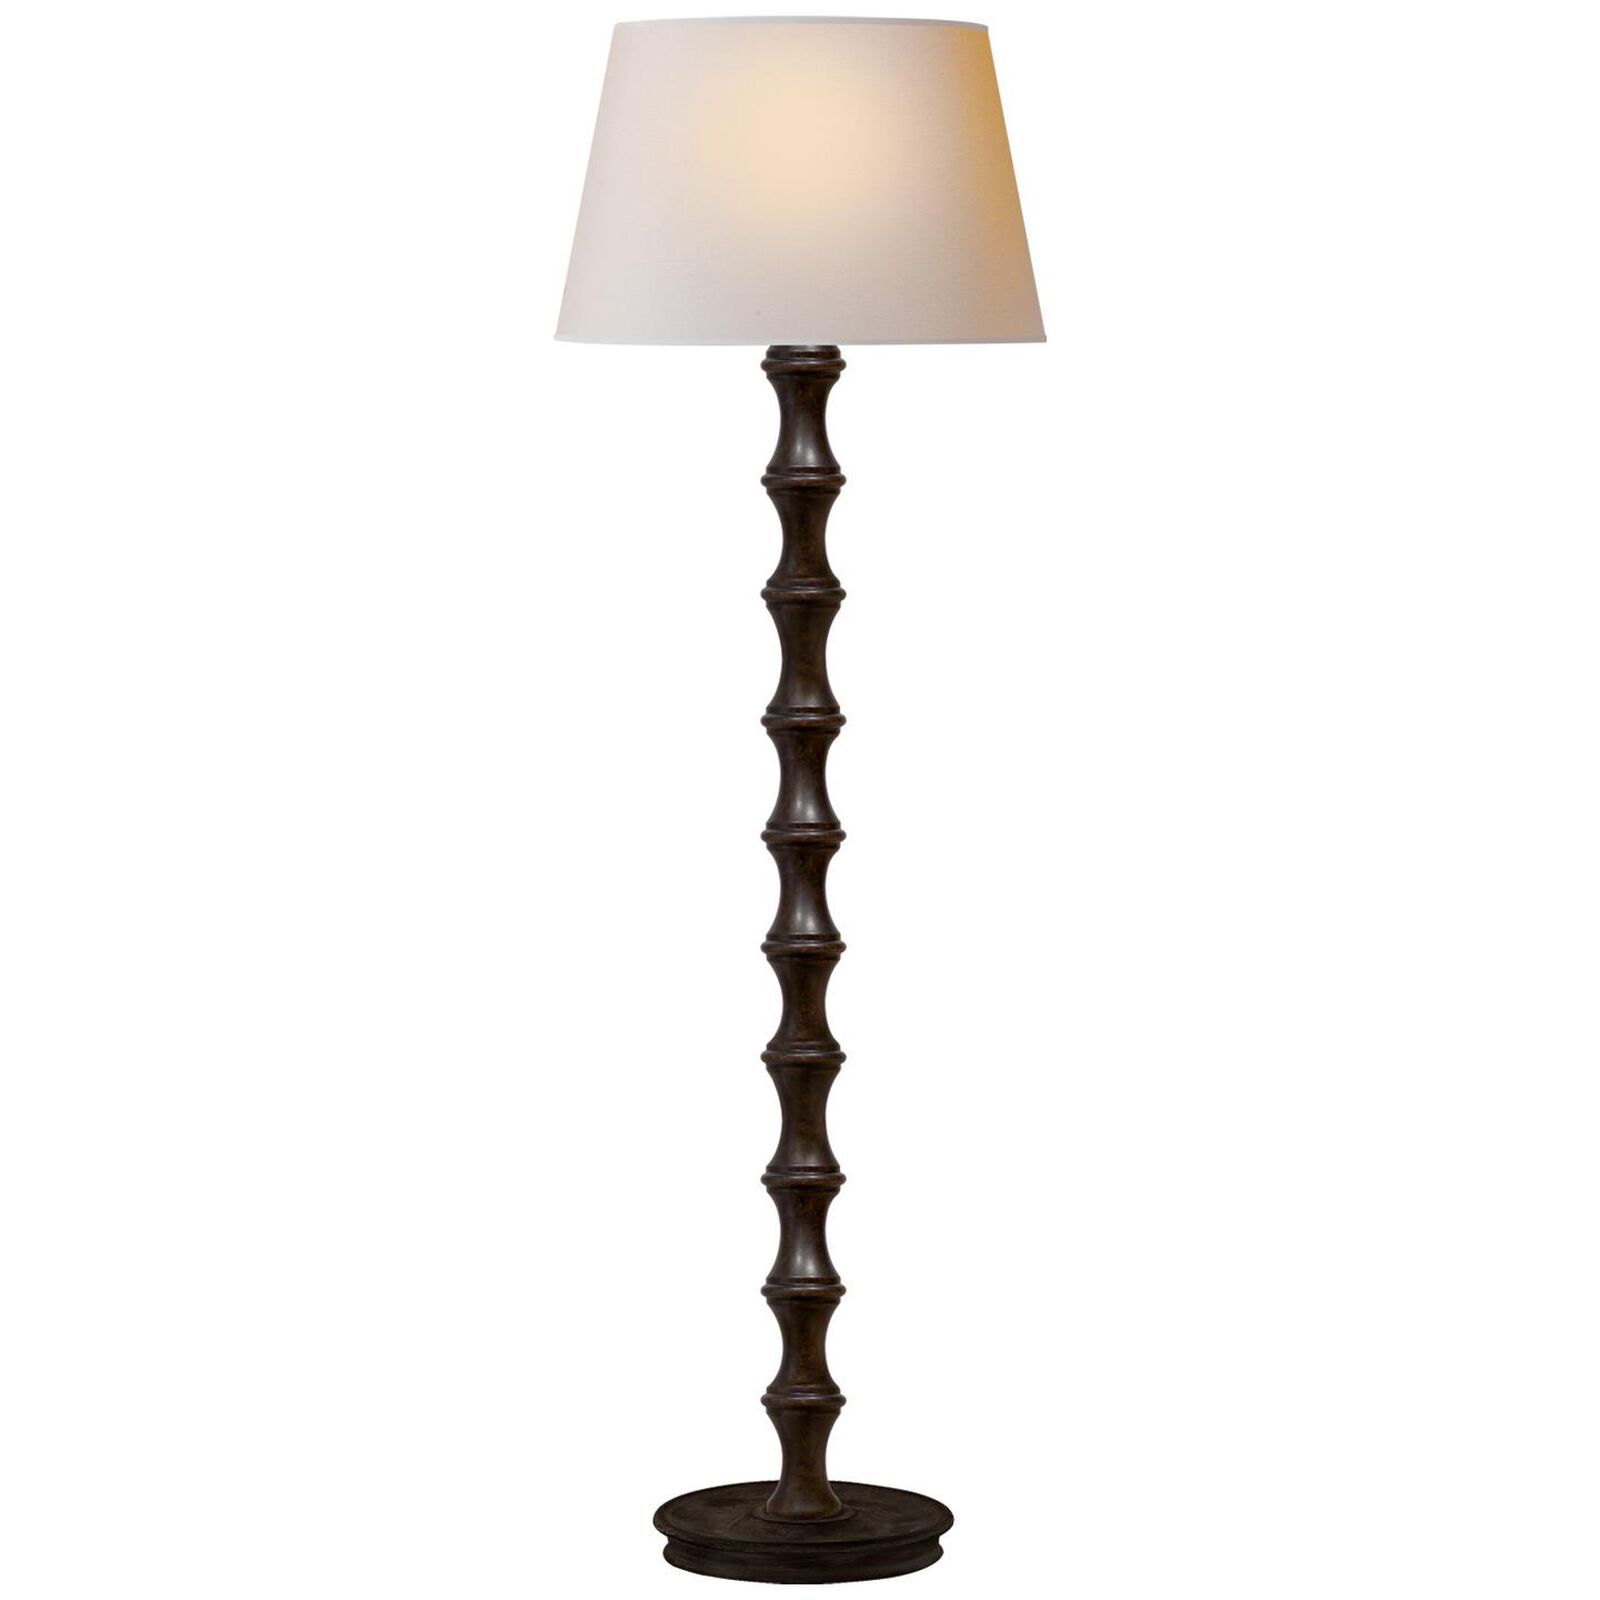 Studio Vc Bamboo 52 Inch Floor Lamp by Visual Comfort and Co. | Capitol Lighting 1800lighting.com